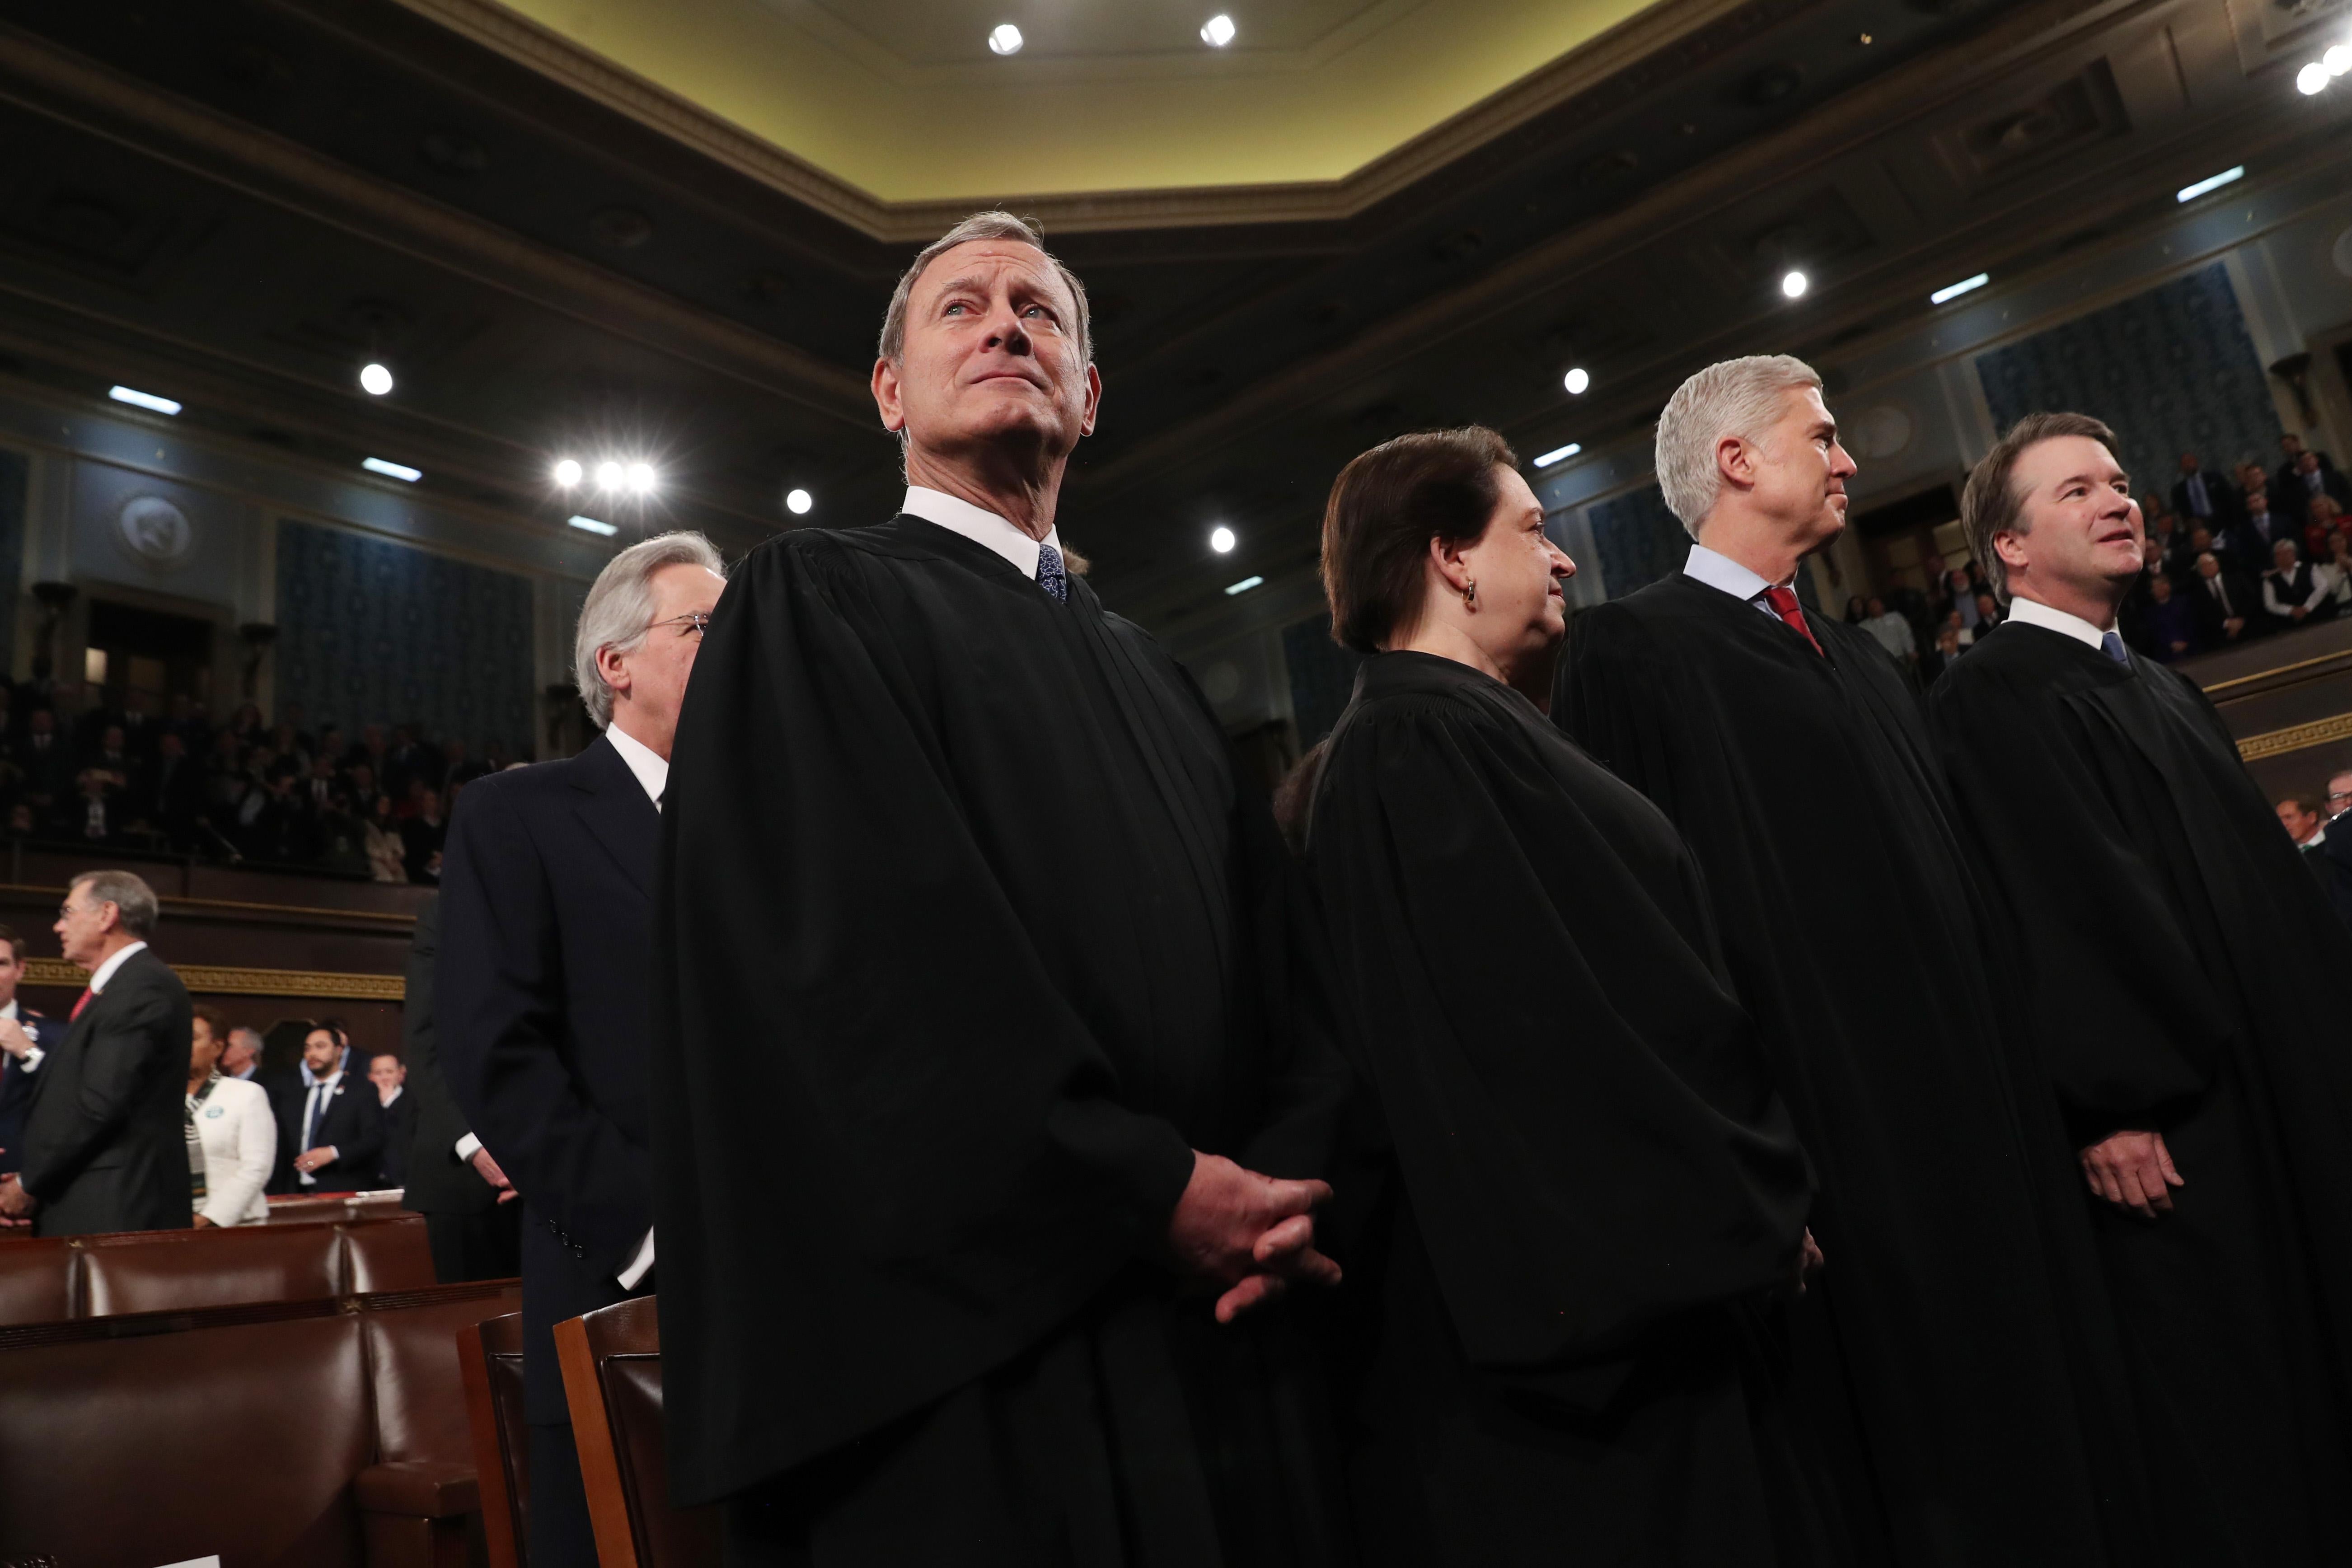 John Roberts stands with Sonia Sotomayor, Neil Gorsuch, and Brett Kavanaugh. All are wearing robes.